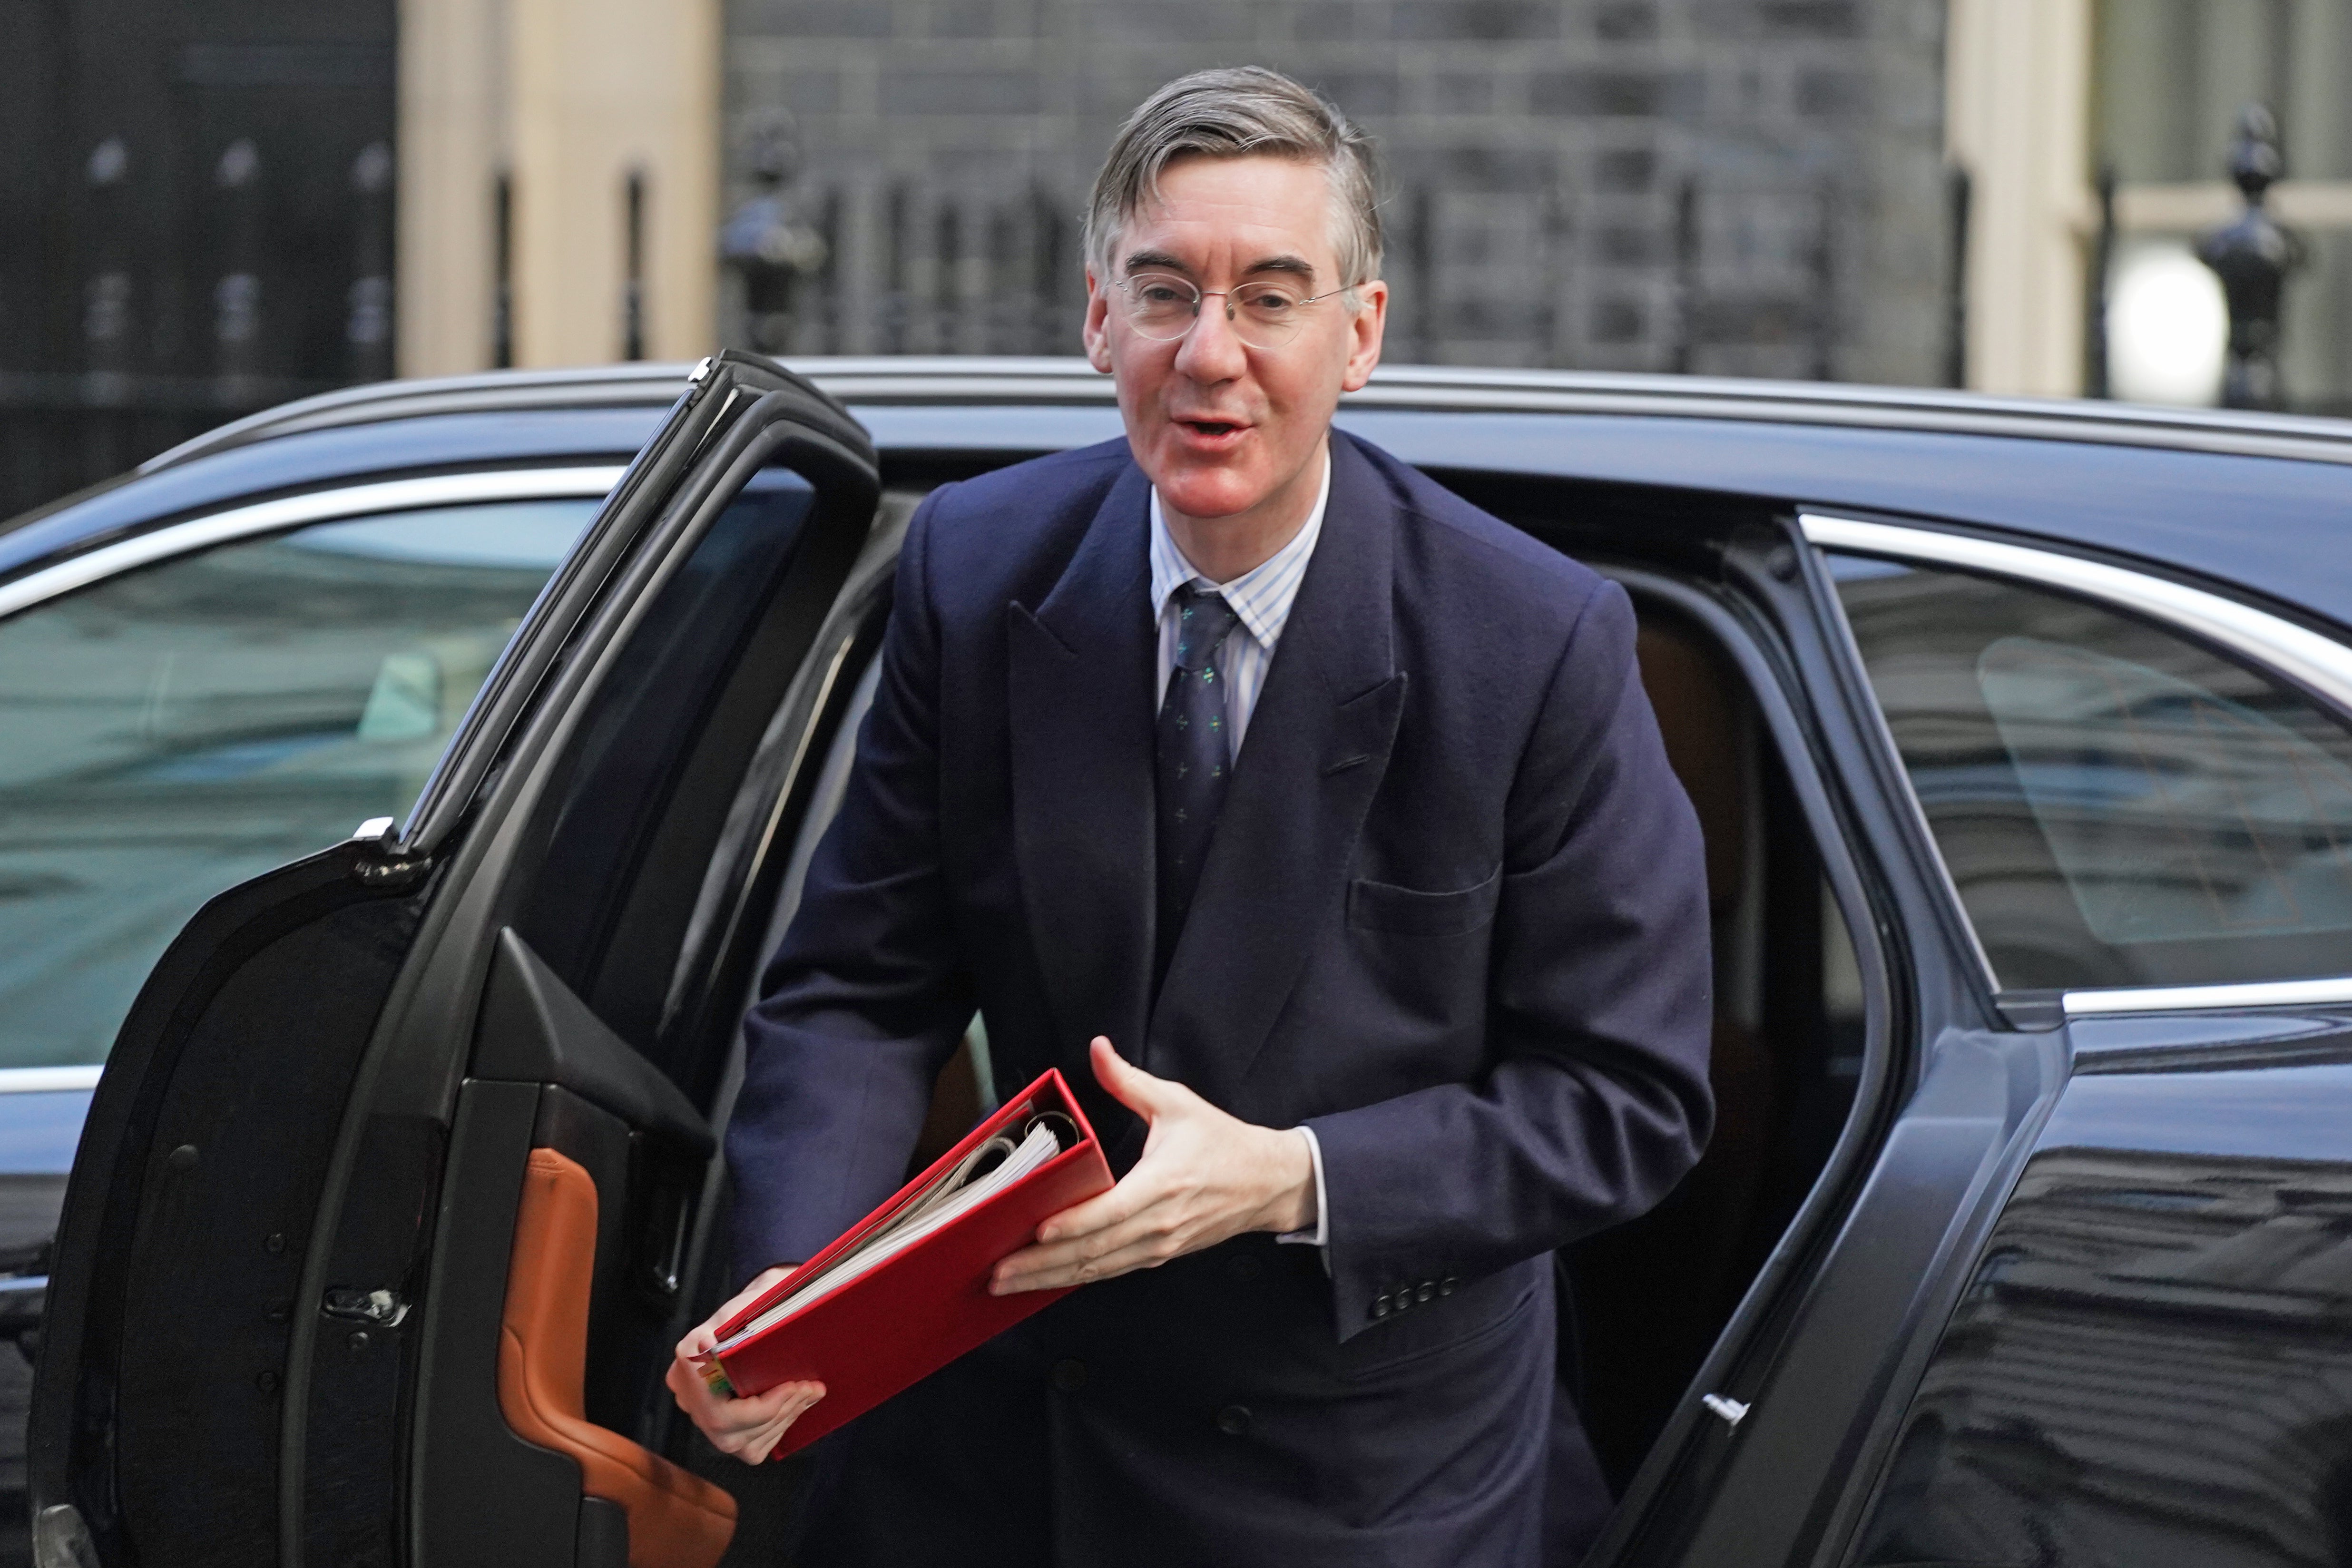 Jacob Rees-Mogg is promoted to ‘minister for Brexit opportunities and government efficiency’